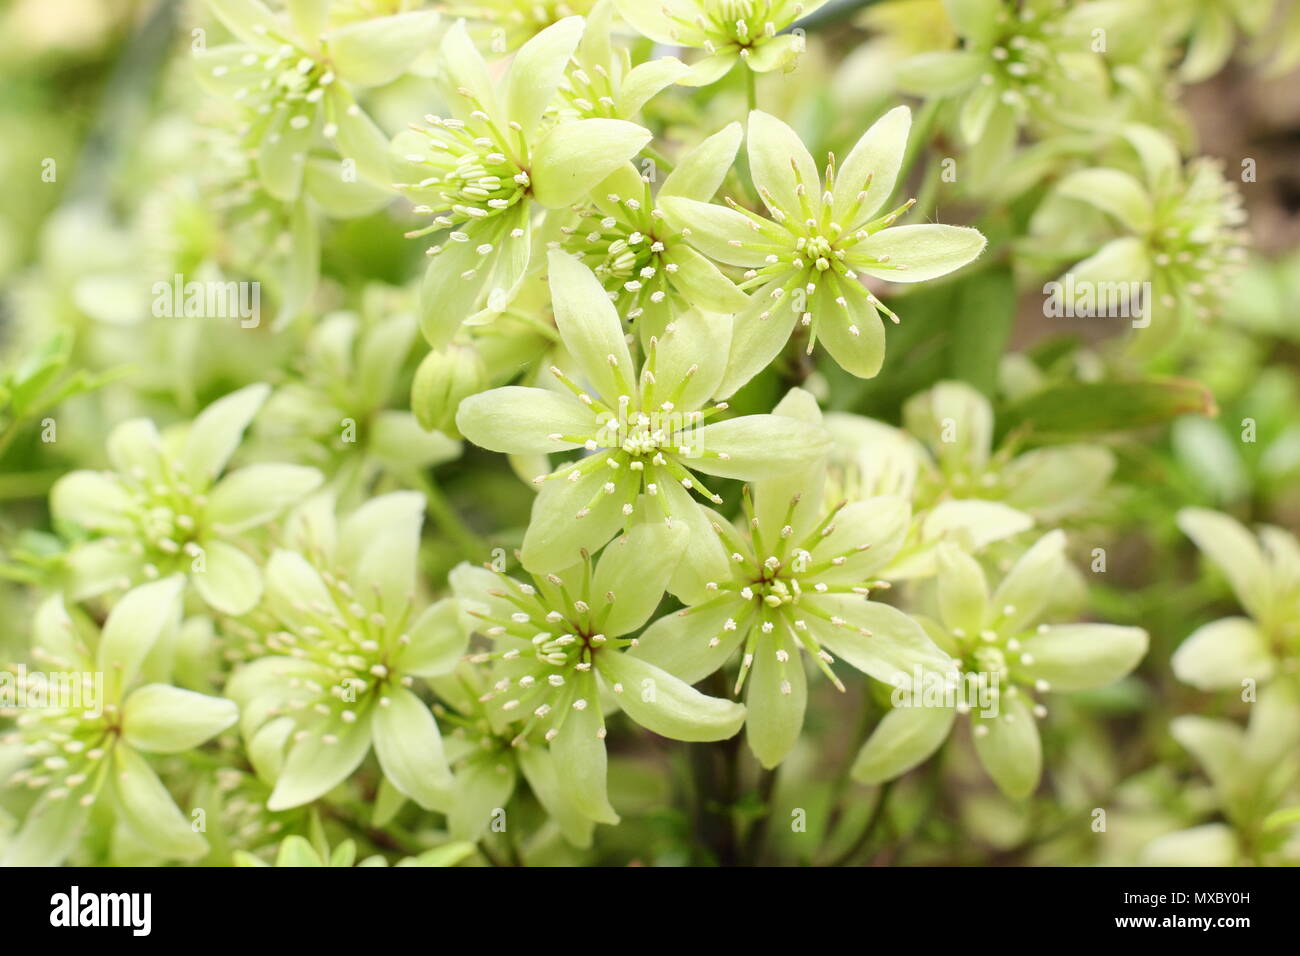 Clematis cartmanii 'Fragrant Oberon', an evergreen clematis, in blossom in spring (May), England, UK Stock Photo